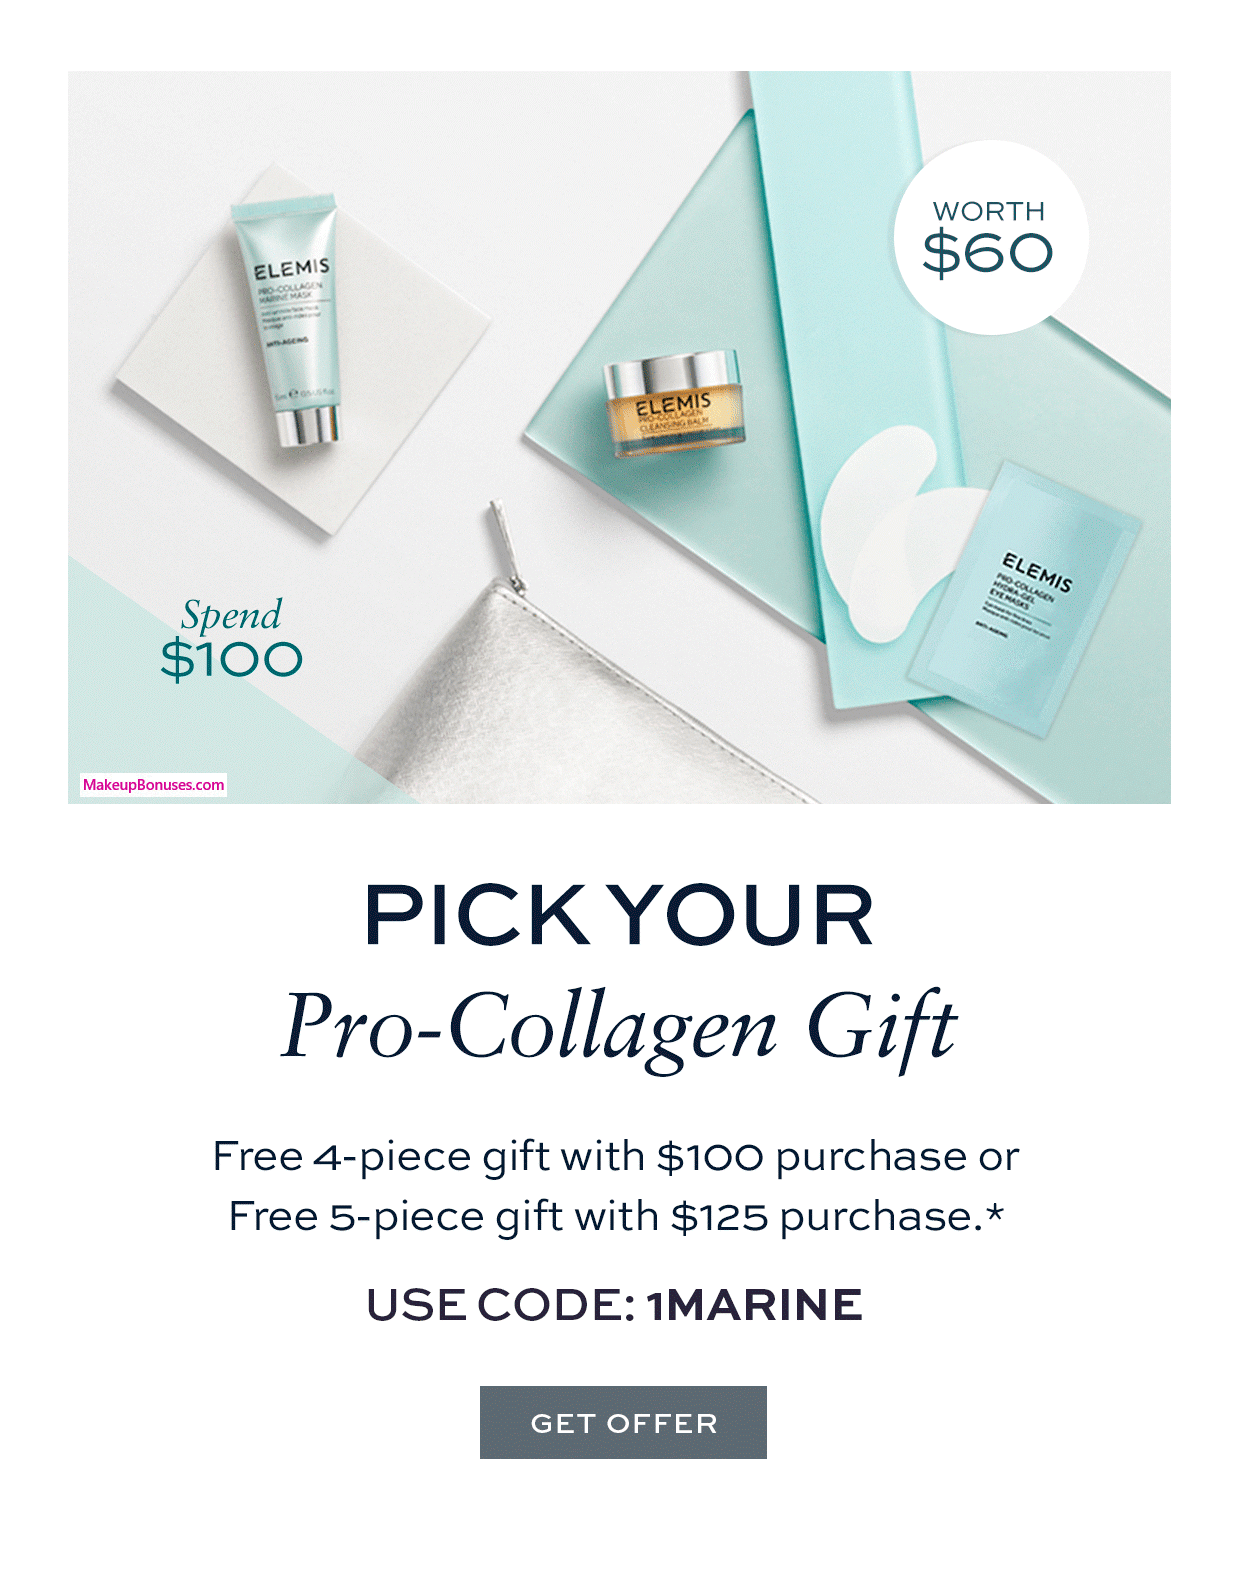 Receive a free 4-pc gift with $100 Elemis purchase #elemis